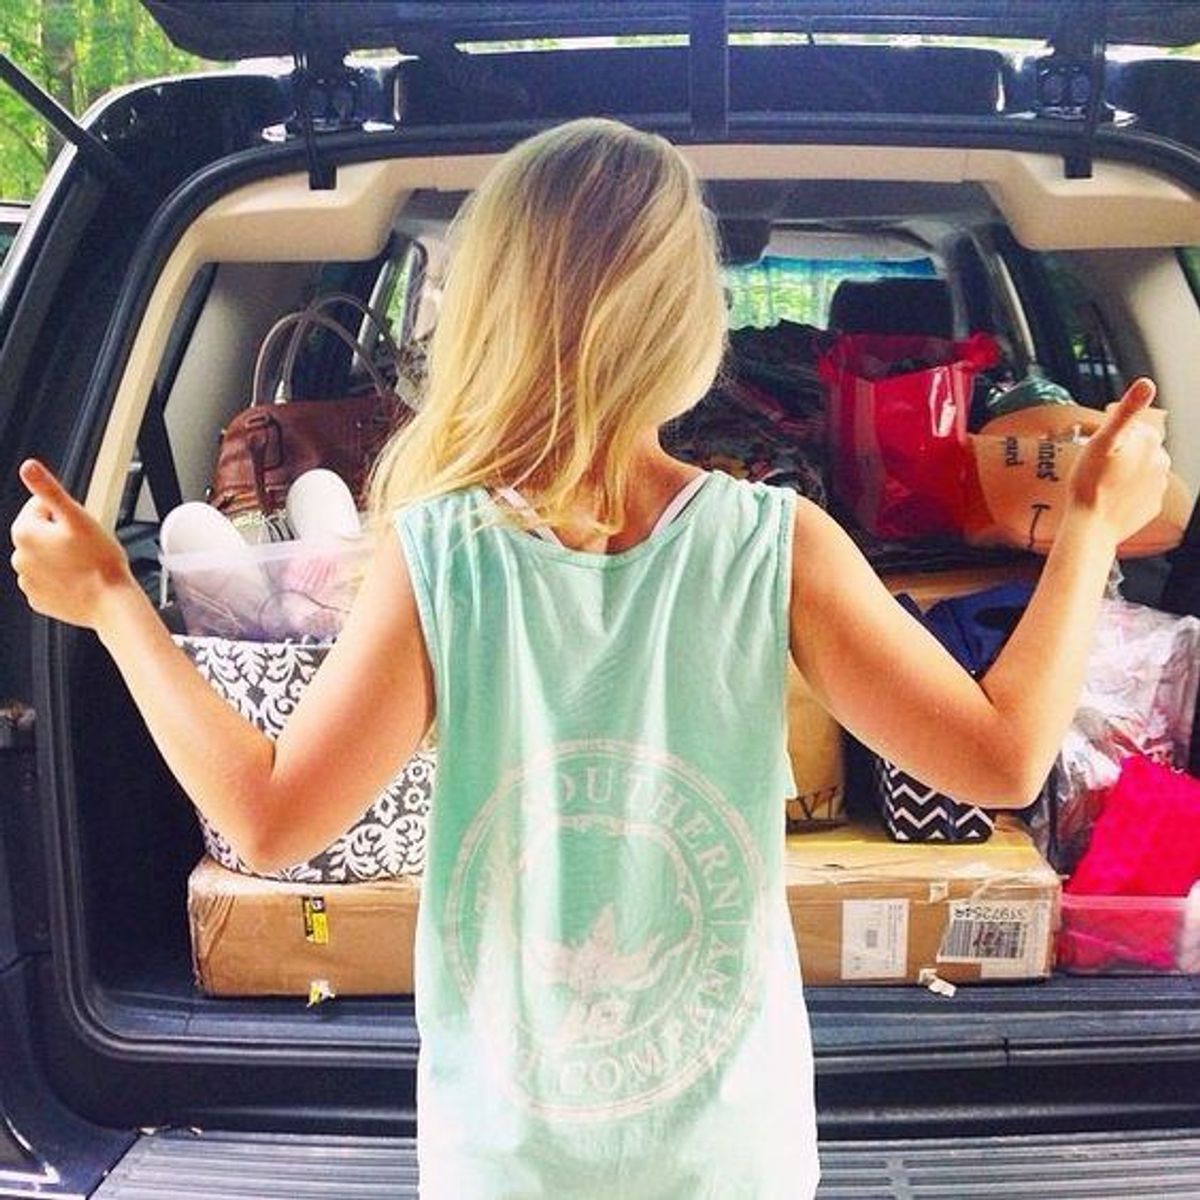 11 Reasons Why You Should Move Away For College